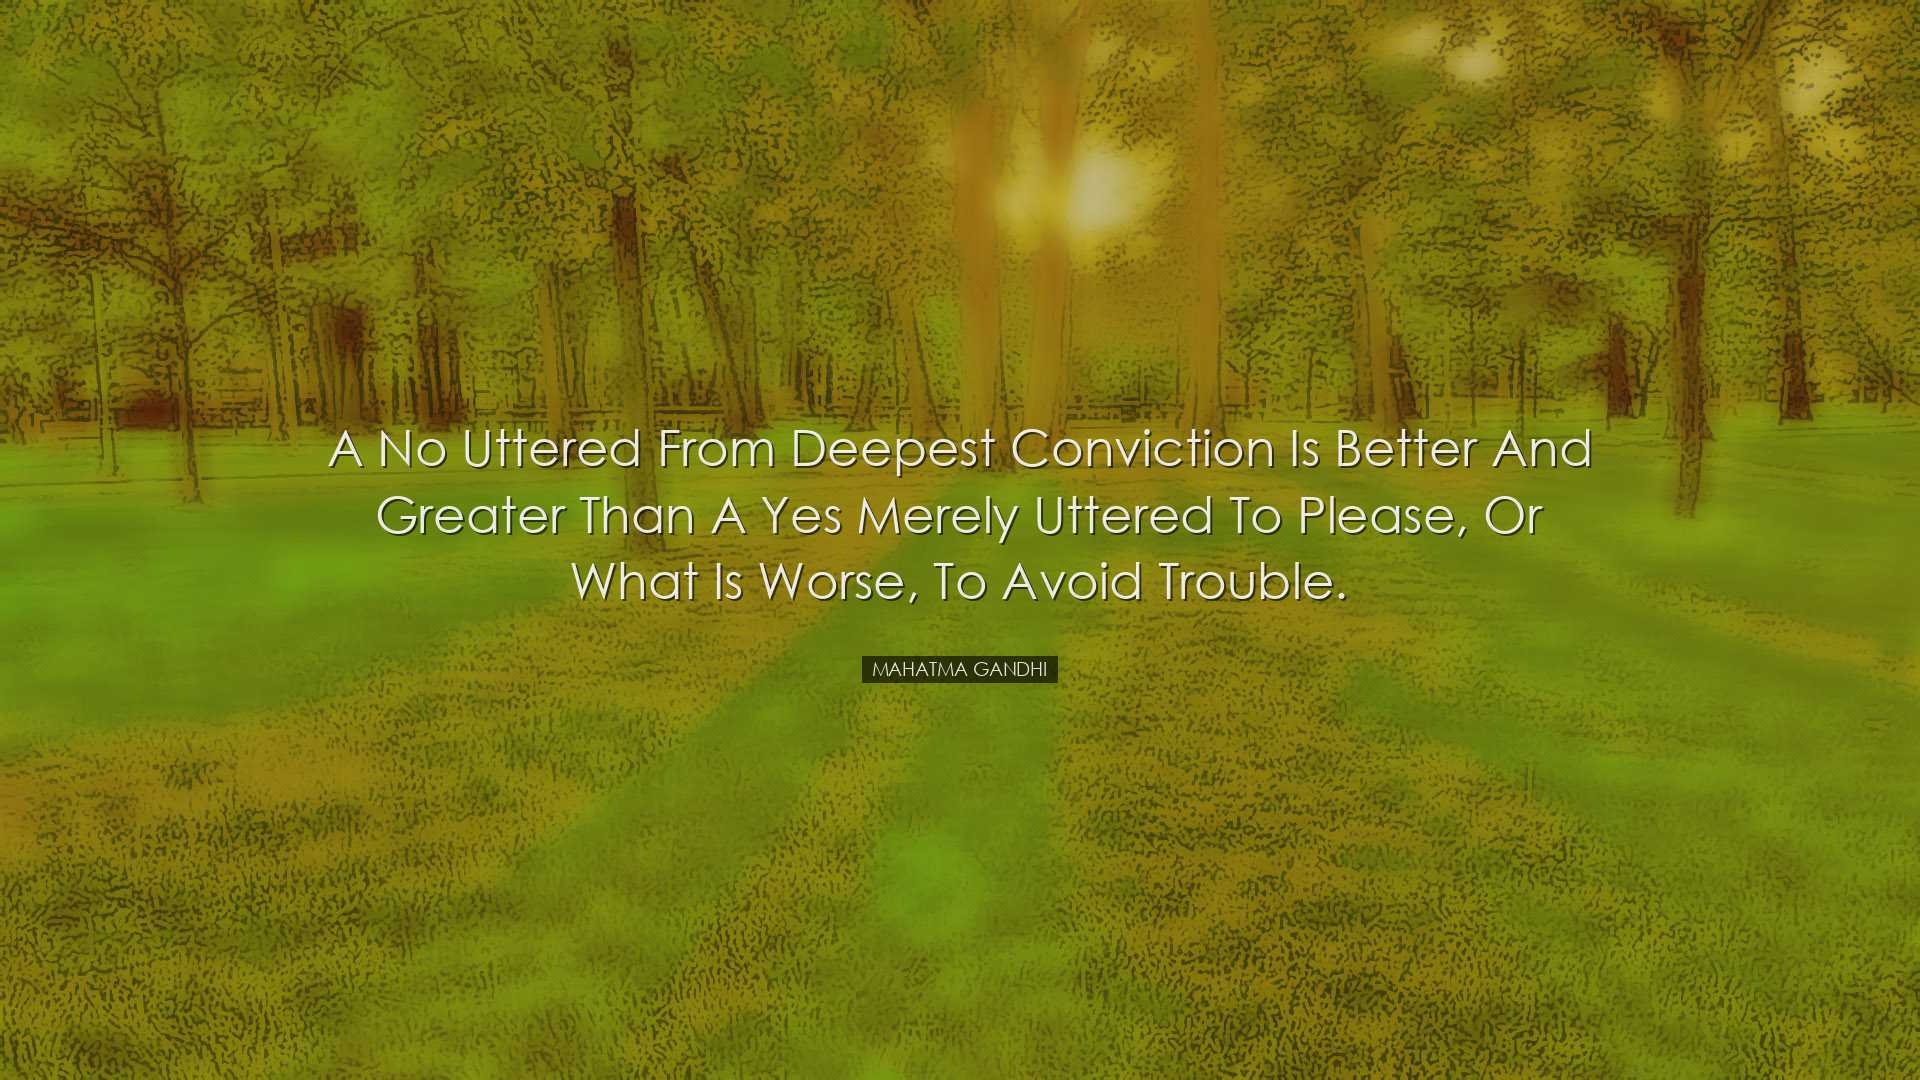 A No uttered from deepest conviction is better and greater than a